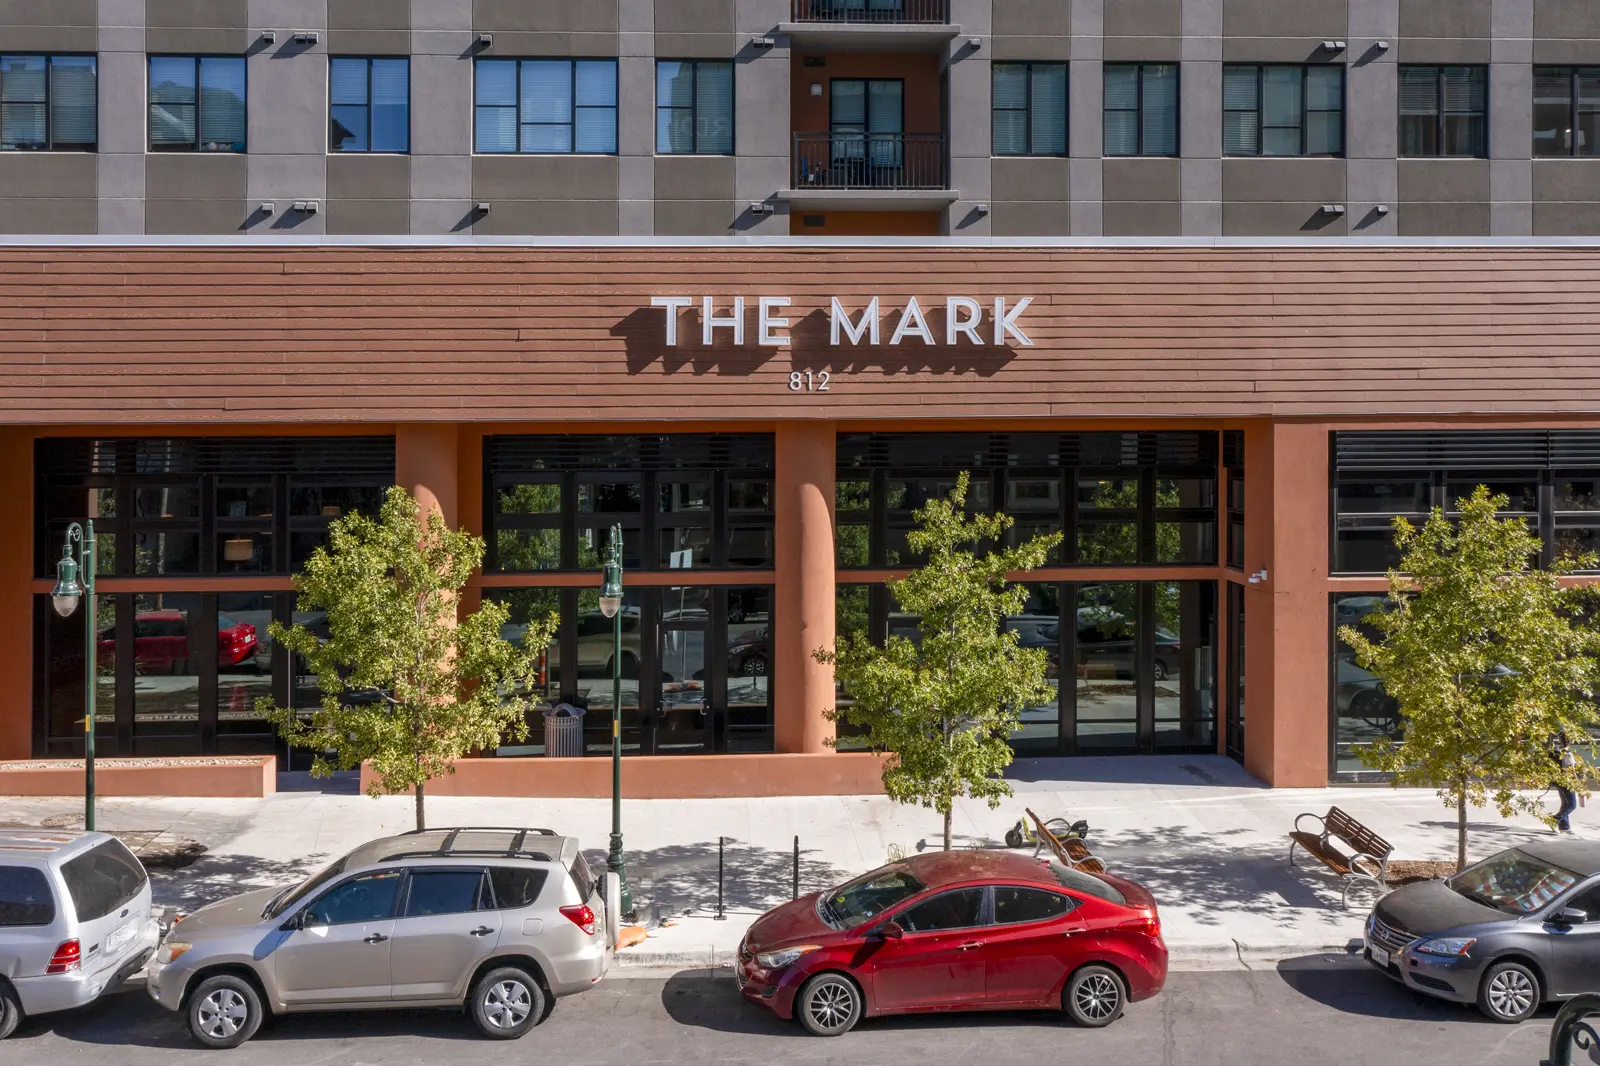 Image of the front entrance to The Mark apartments.